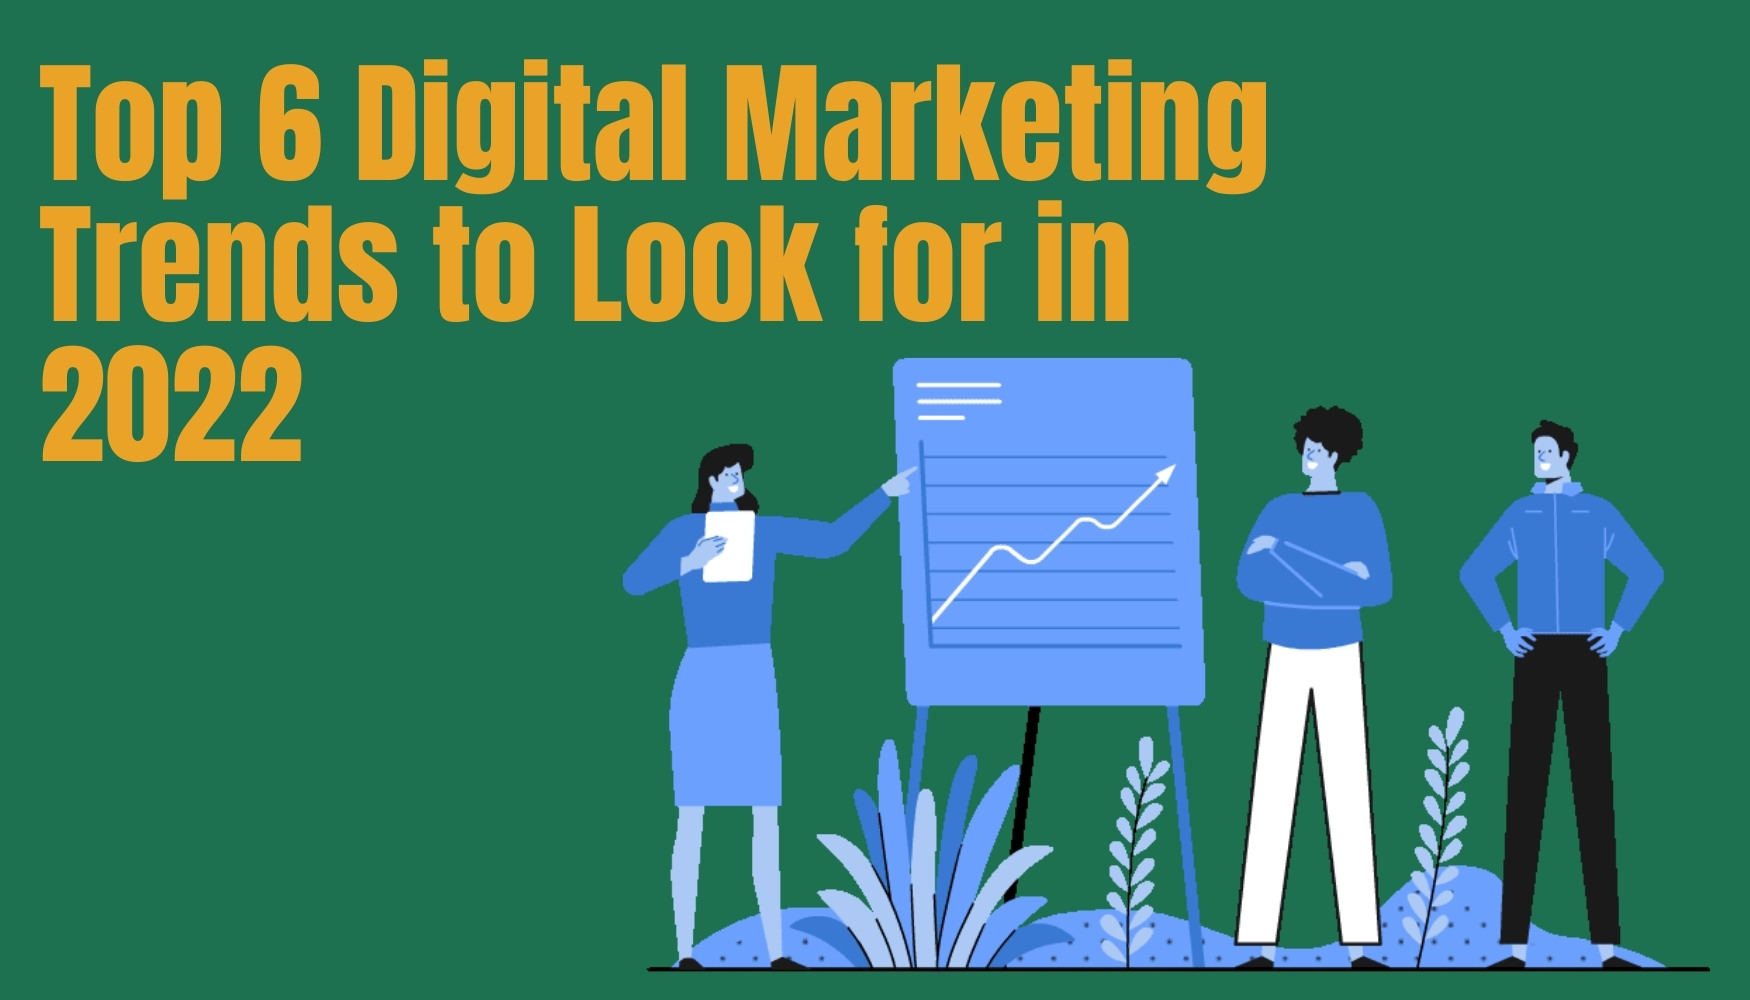 Top 6 Digital Marketing Trends to Look for in 2022 (800 × 400 px)